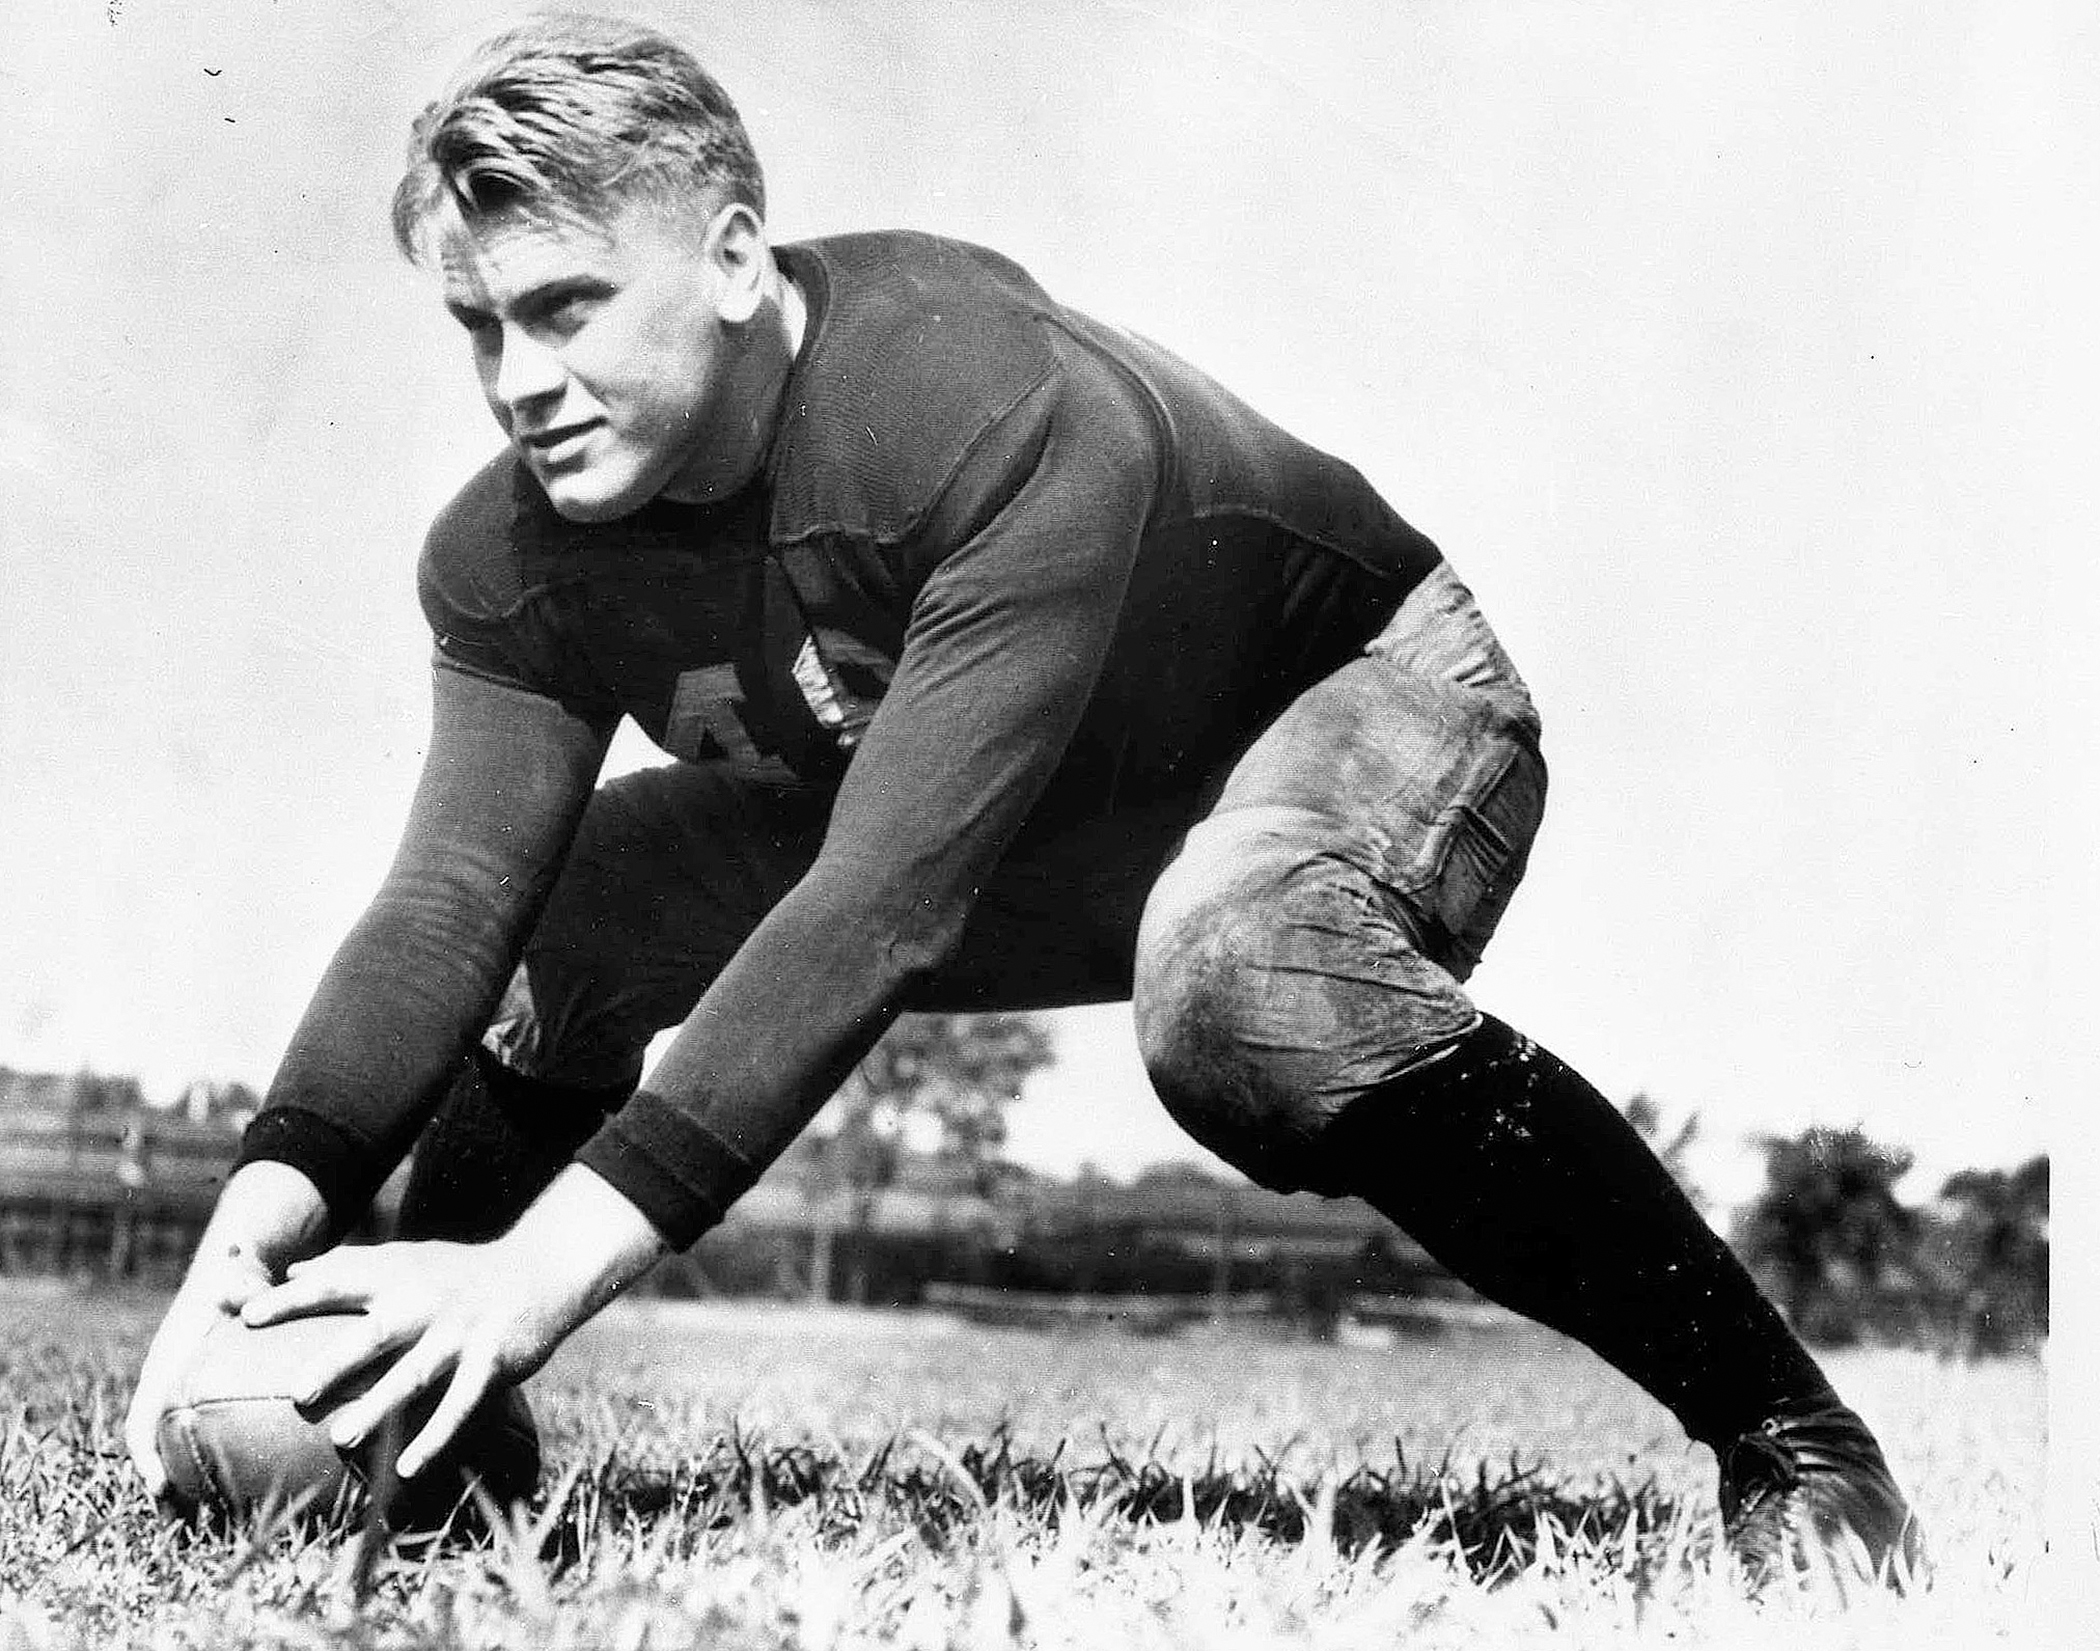 Gerald Ford as a center on the University of Michigan football team, 1933